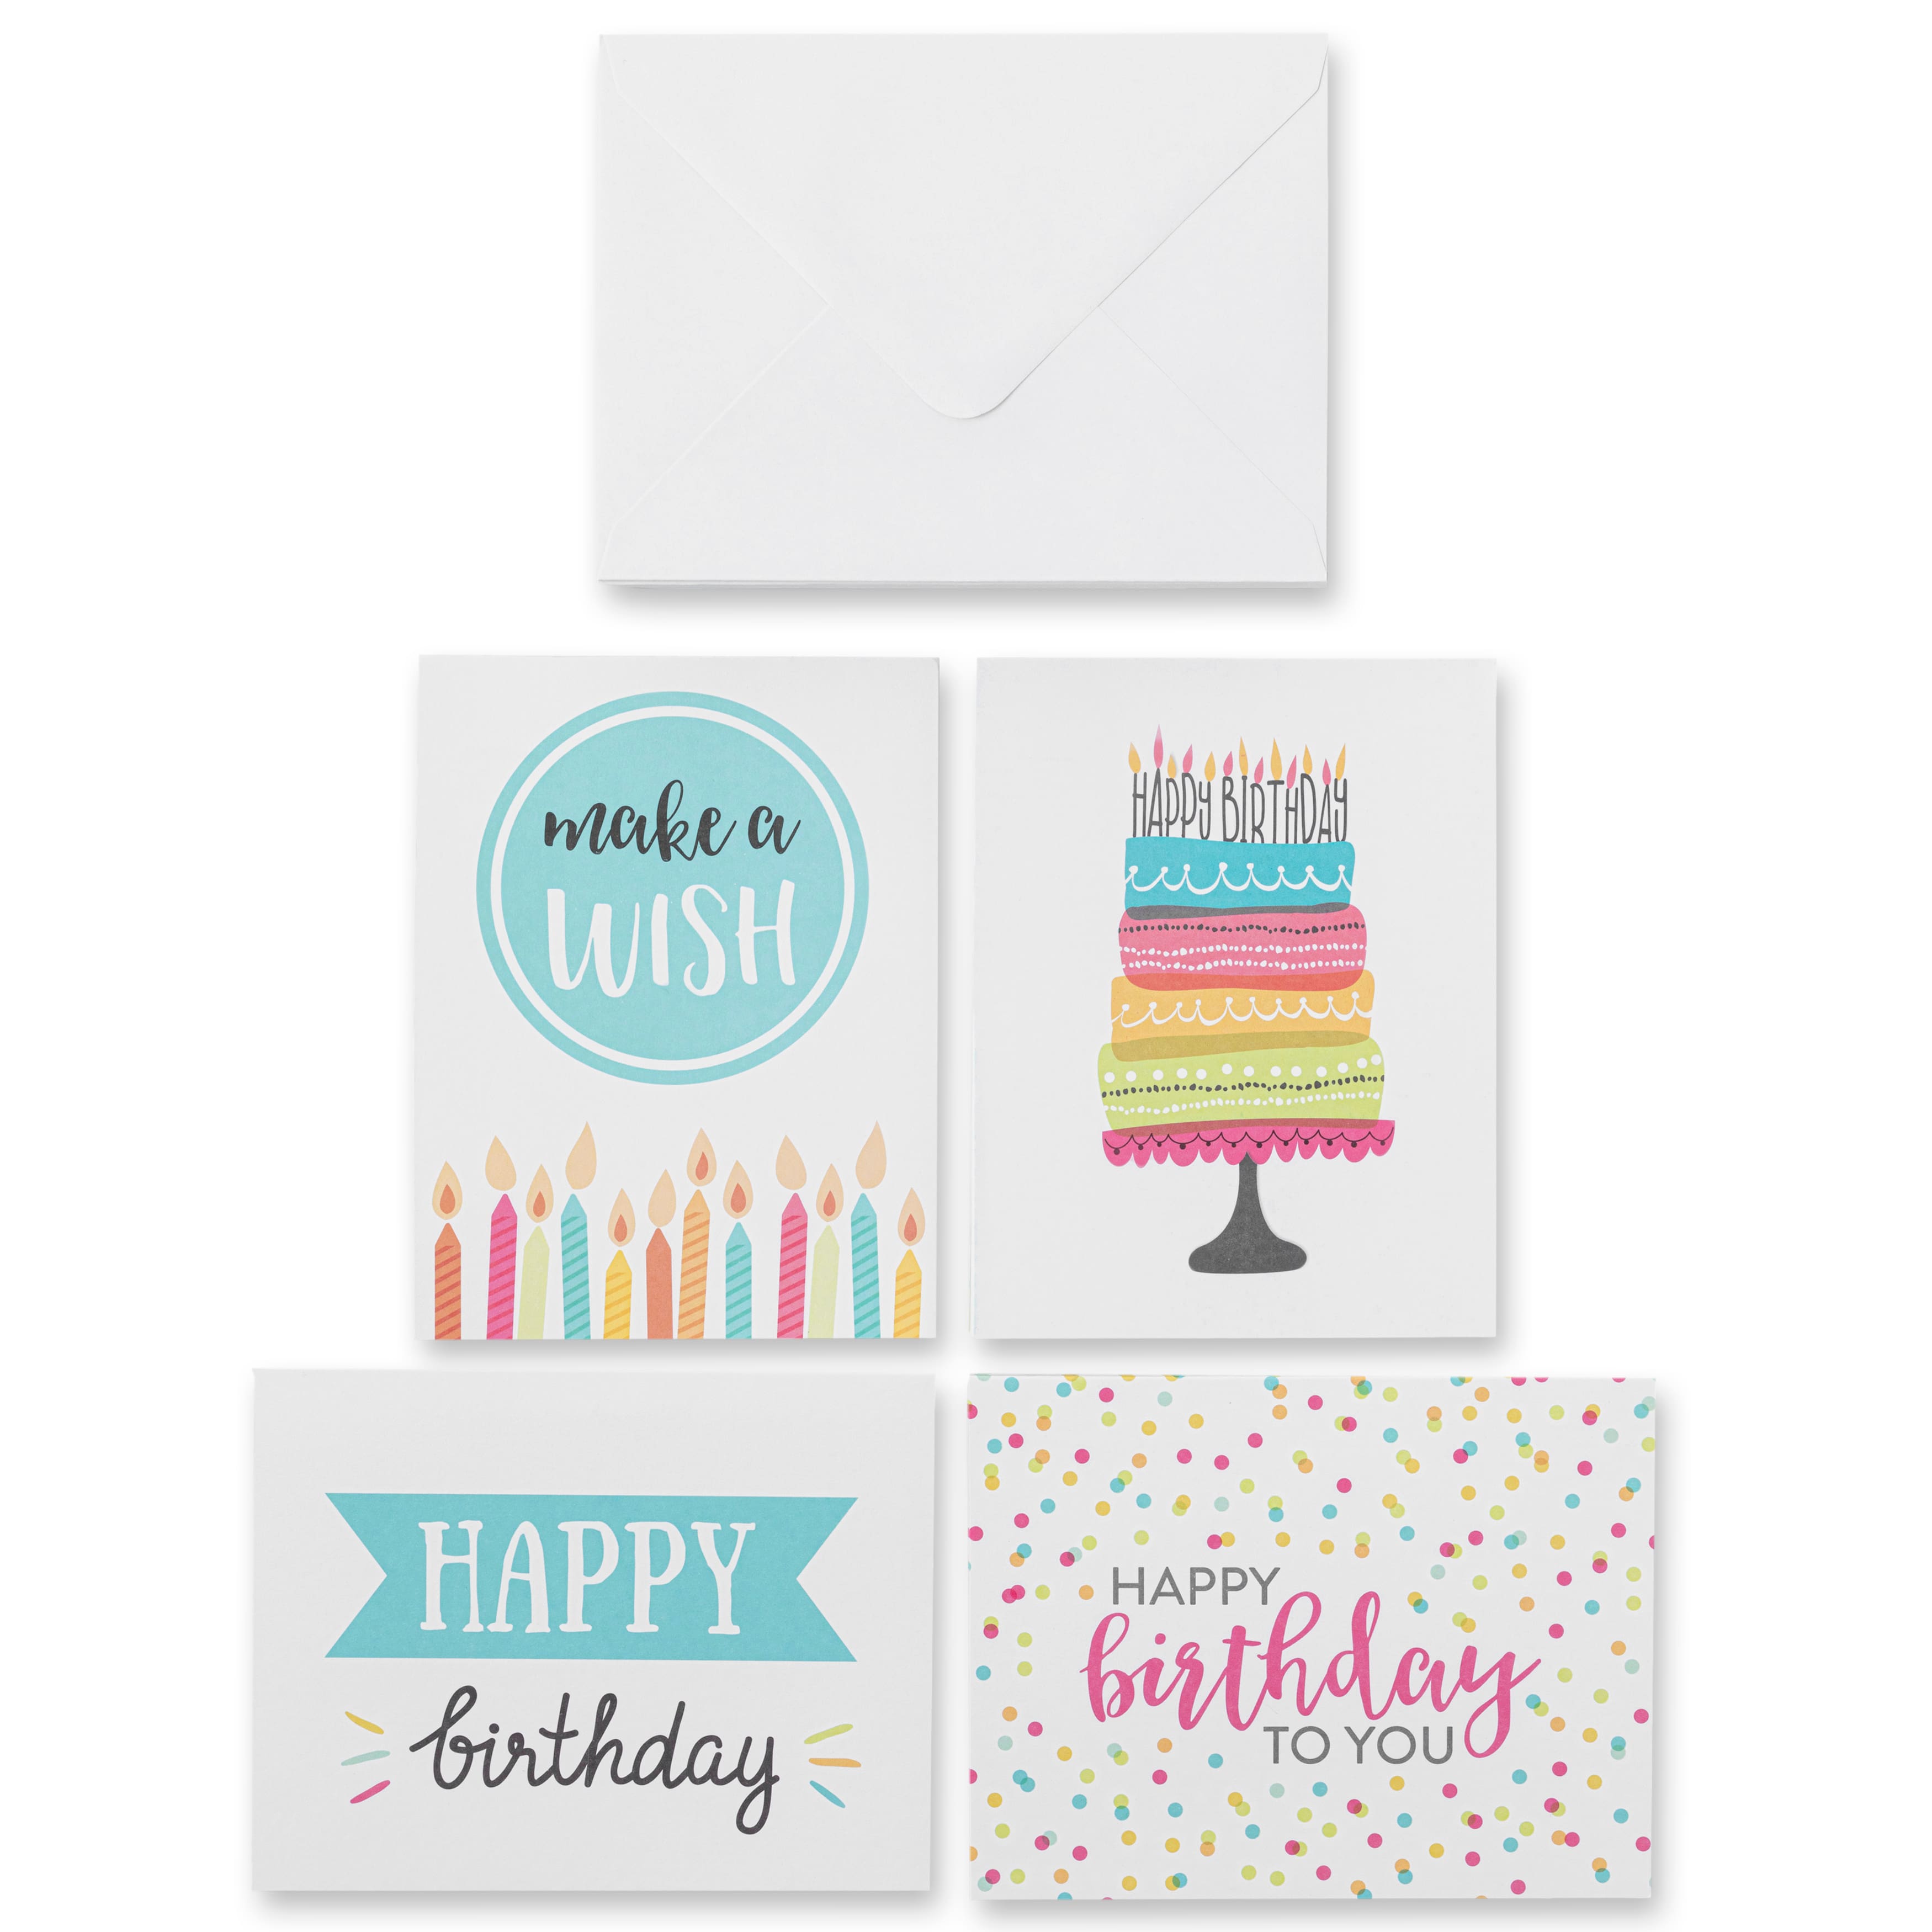 Shop for the Boxed Greeting Cards by Recollections™, 4 x 5.6 at Michaels